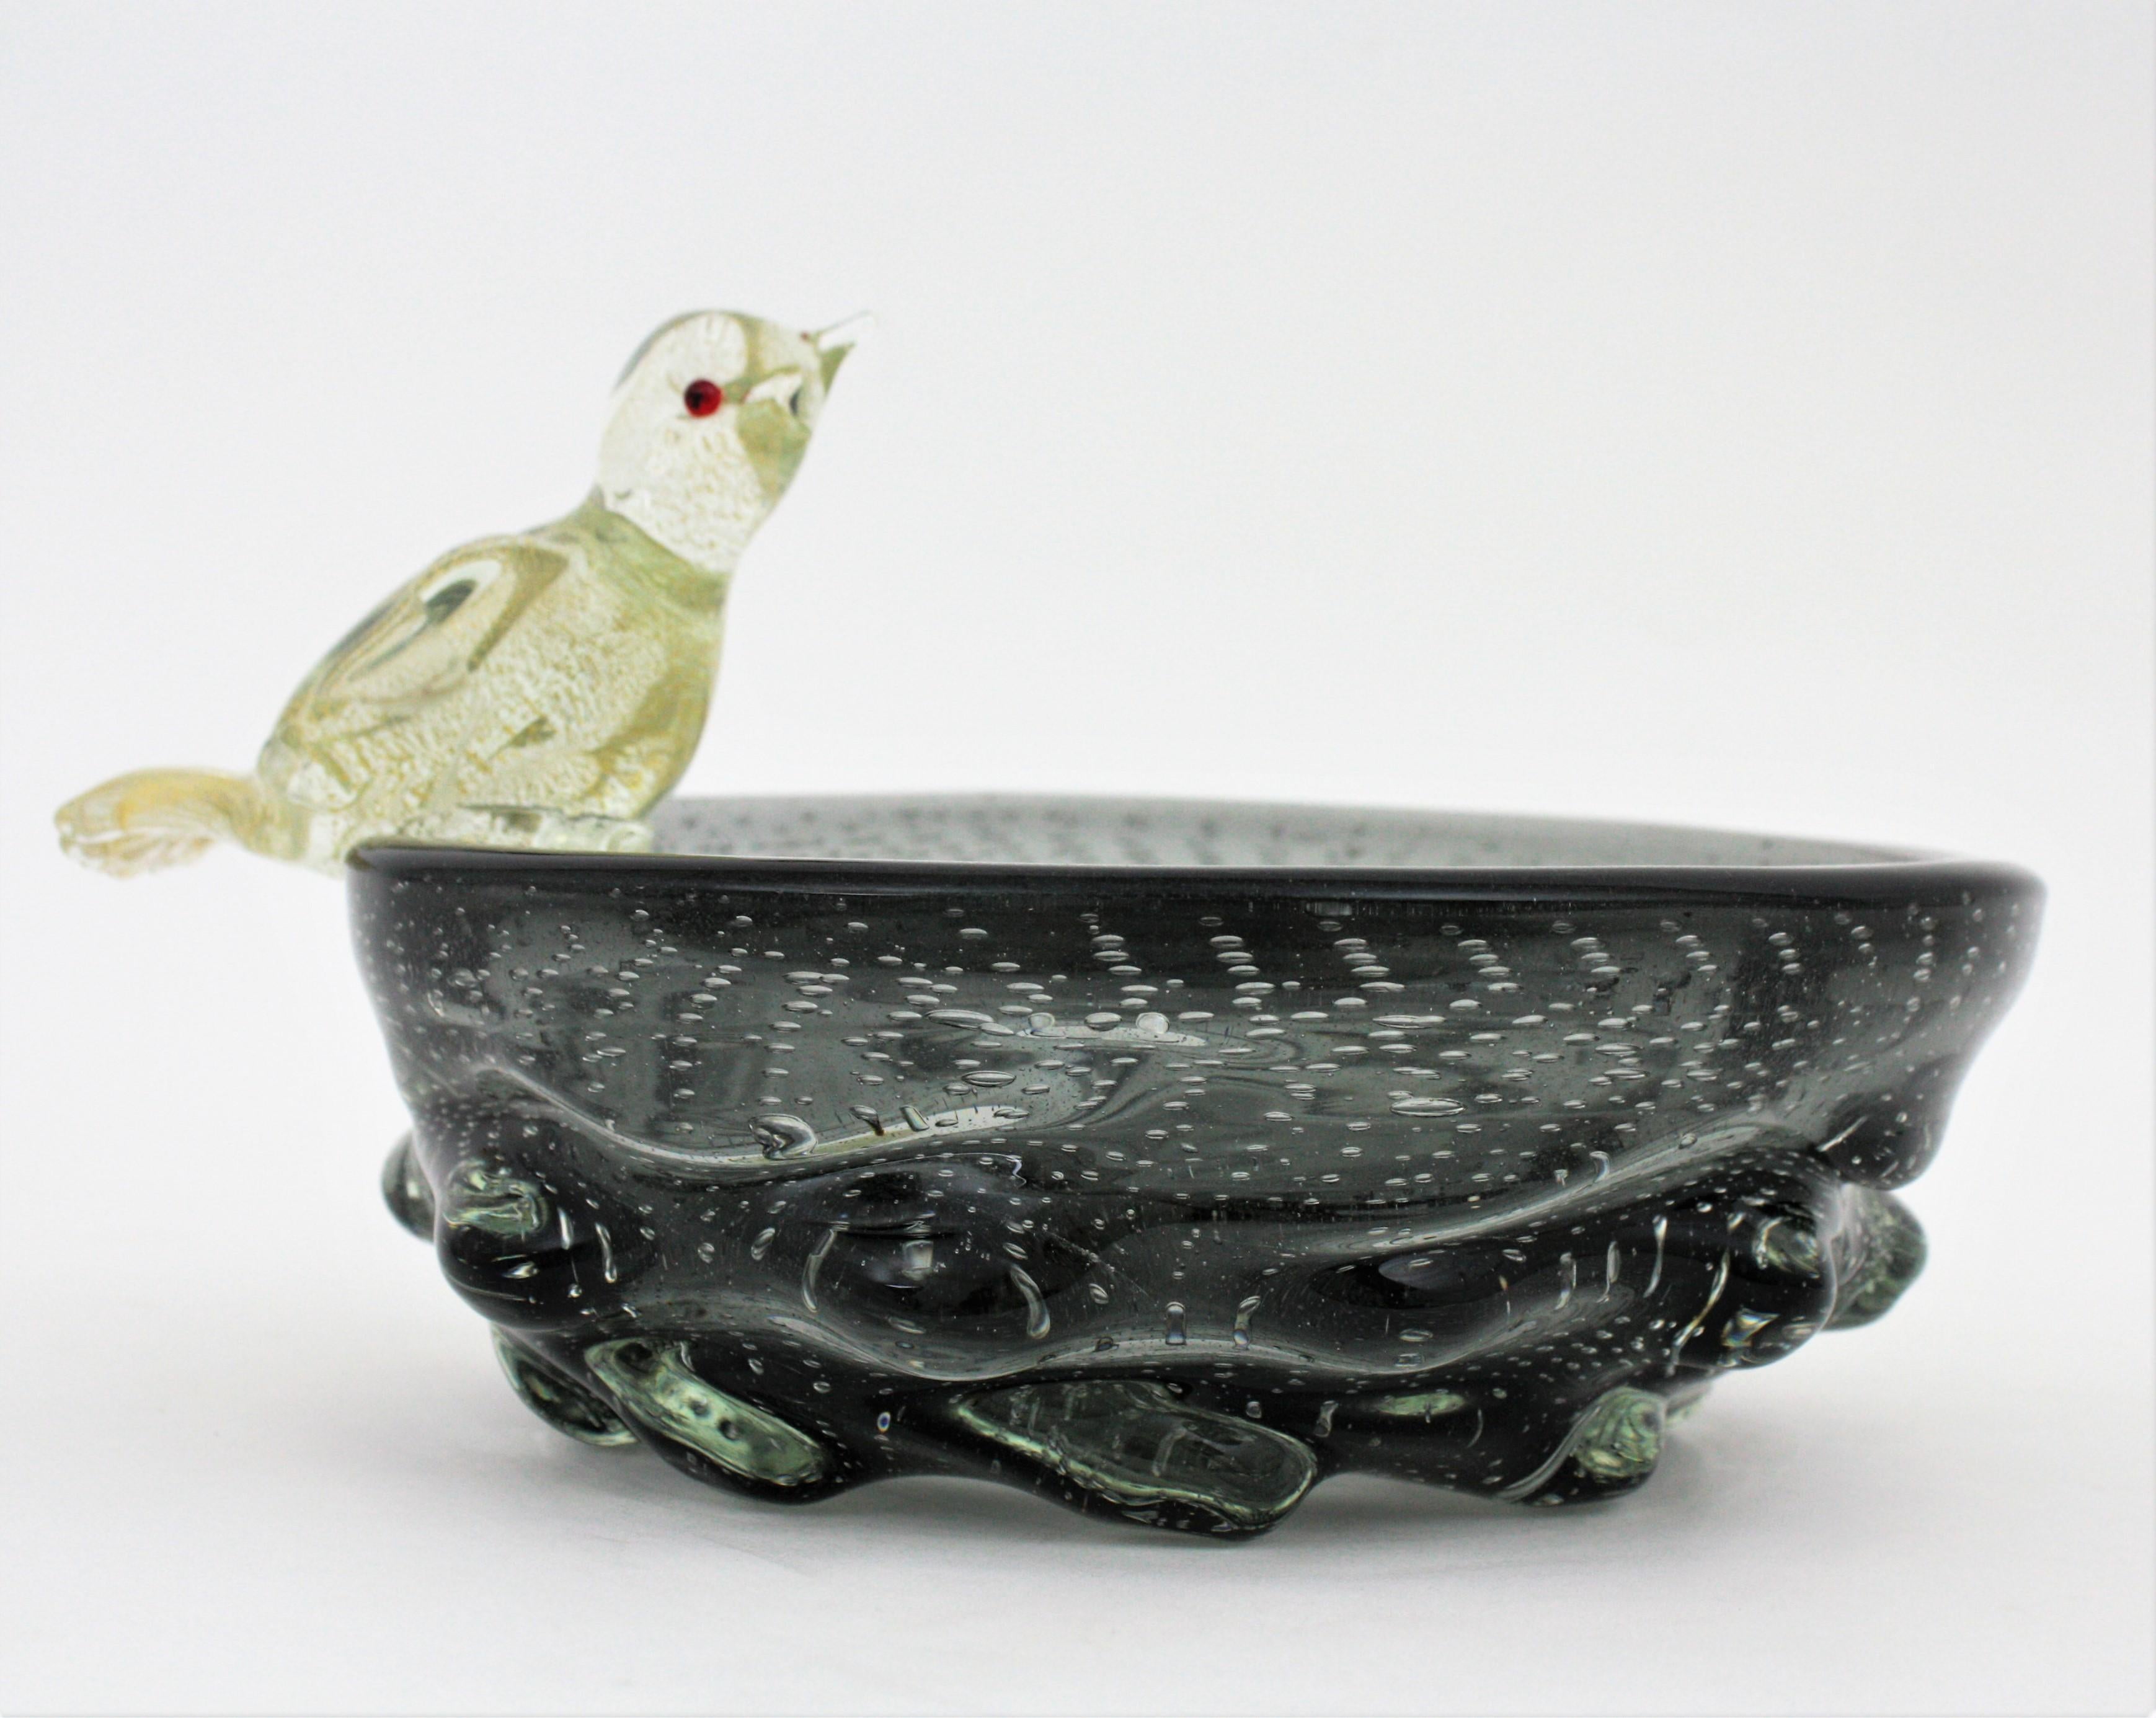 One of a Kind Murano art glass large bird bowl or centerpiece with controlled bubbles and Aventurine gold and silver flecks. Attributed to Archimede Seguso for Seguso Vetri D'Arte, Italy, 1940s
This glowing large and heavy bowl has controlled air